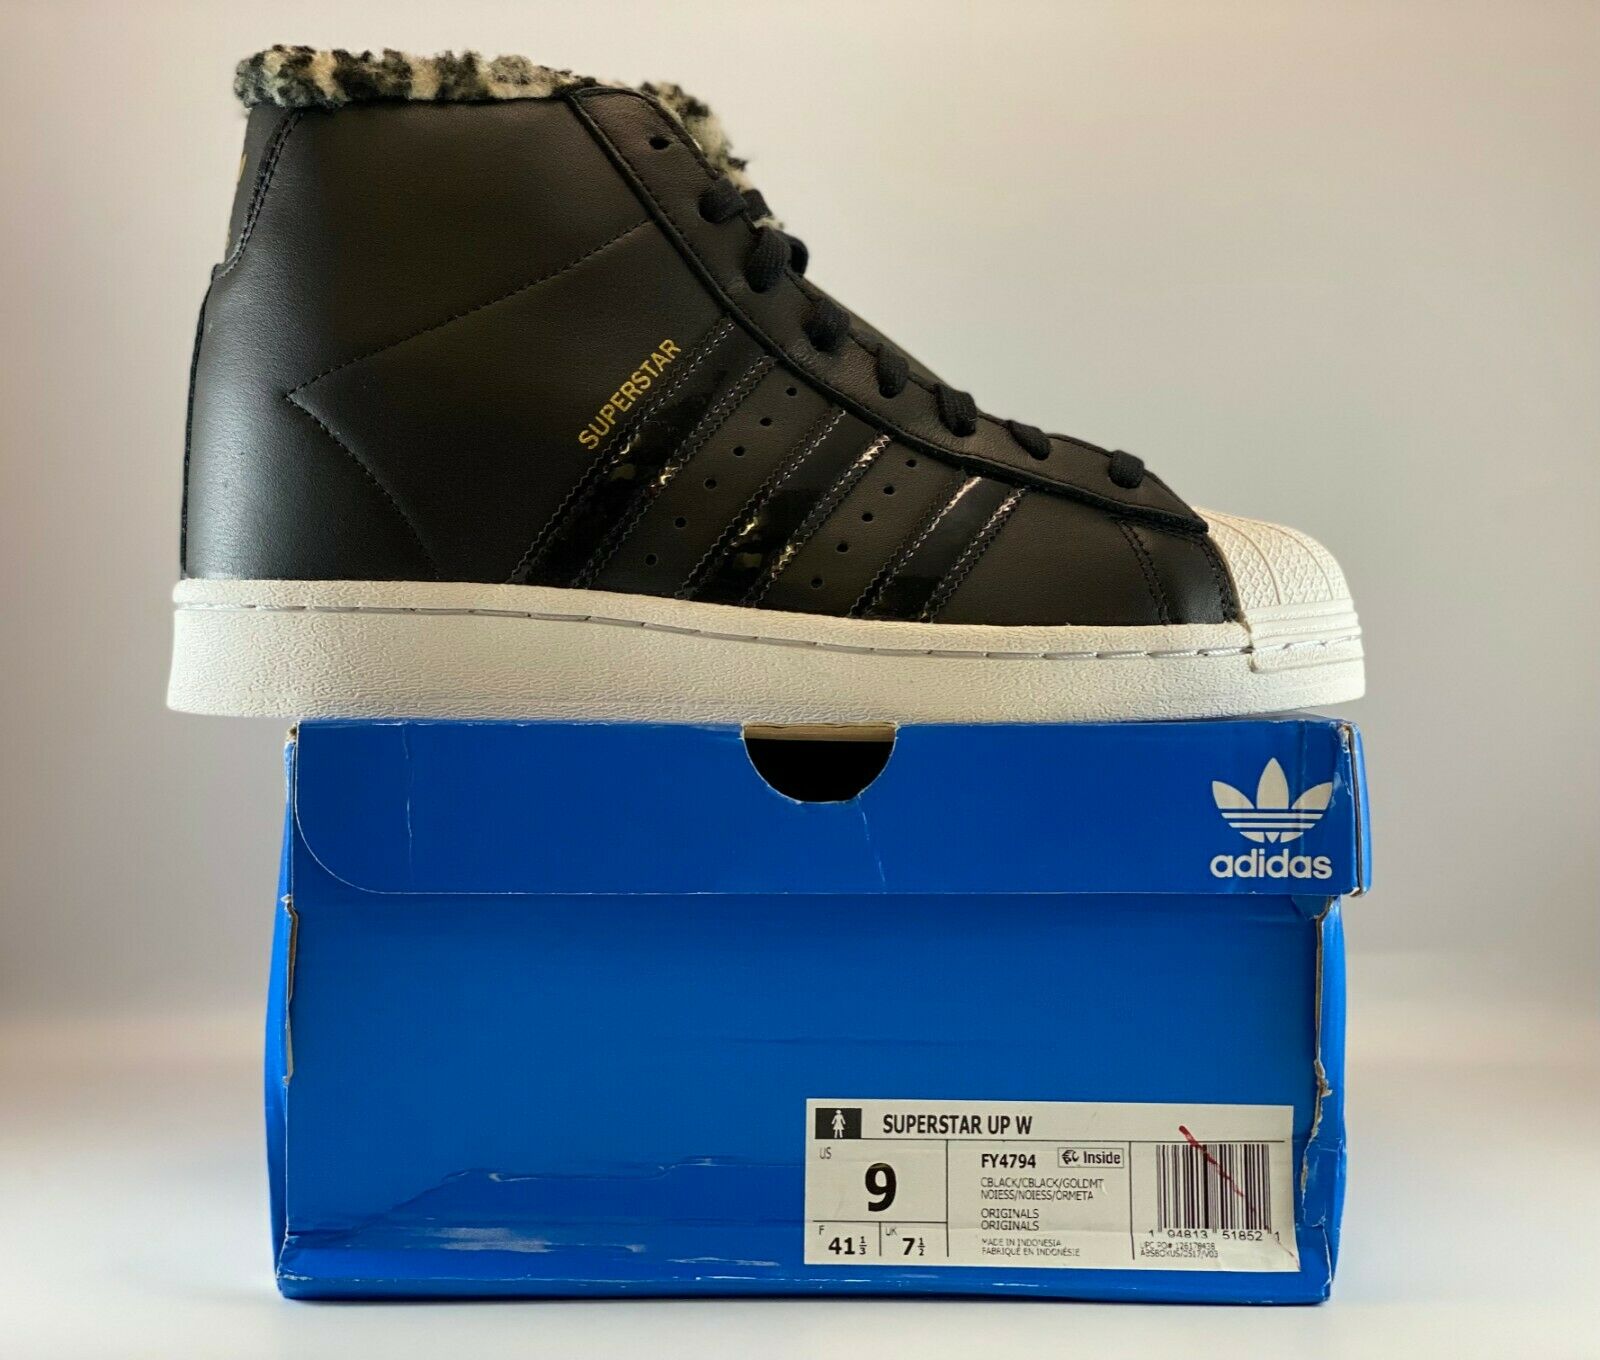 Adidas Originals Superstar Up Womens Wedged Shoes Size 9 Core Black Gold FY4794